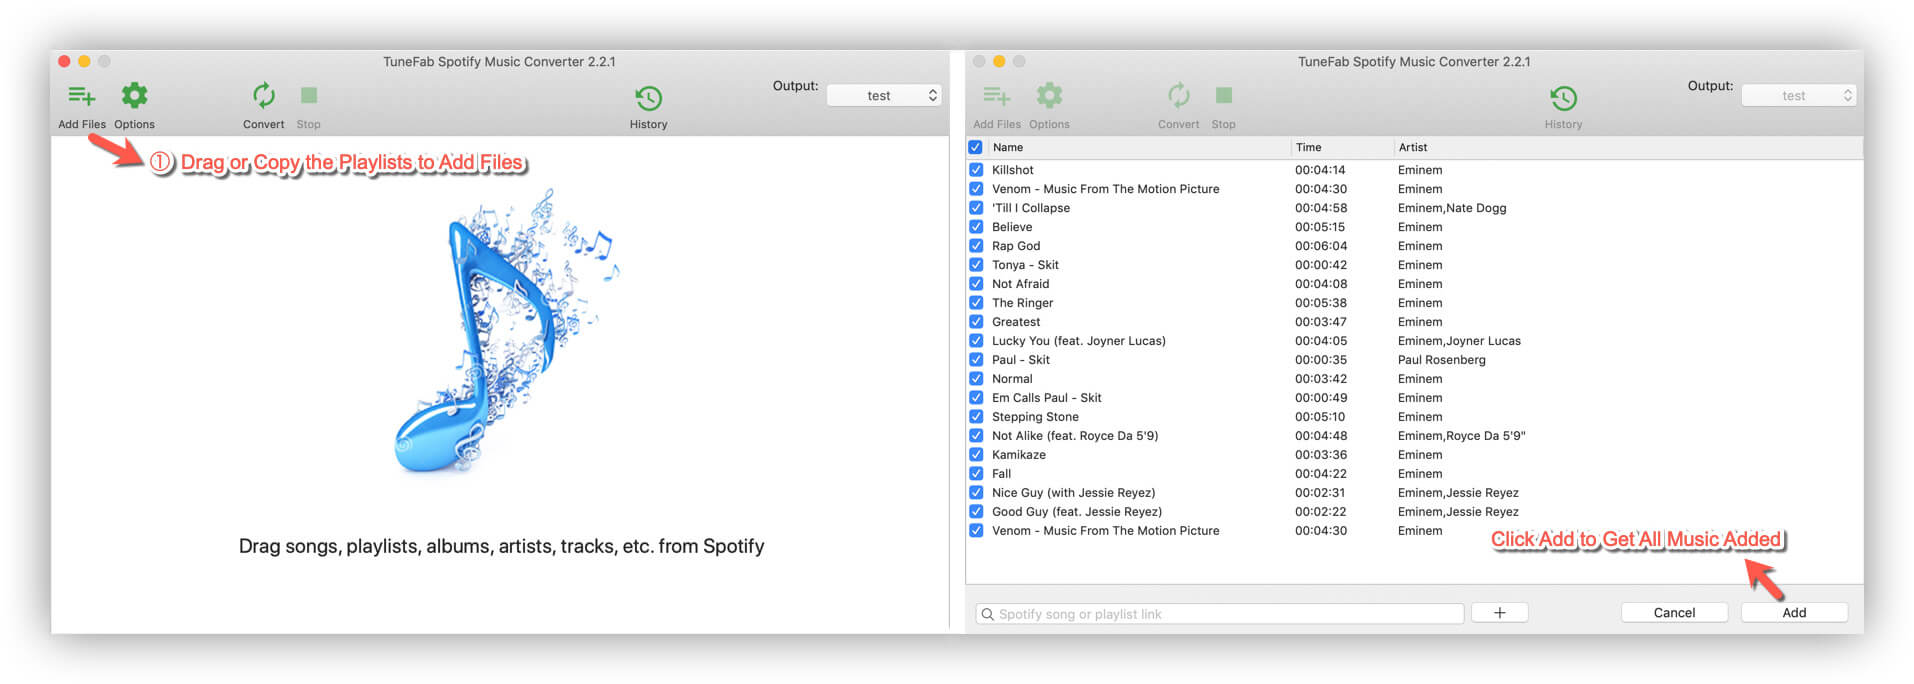 How Do I Download Spotify Songs To Itunes